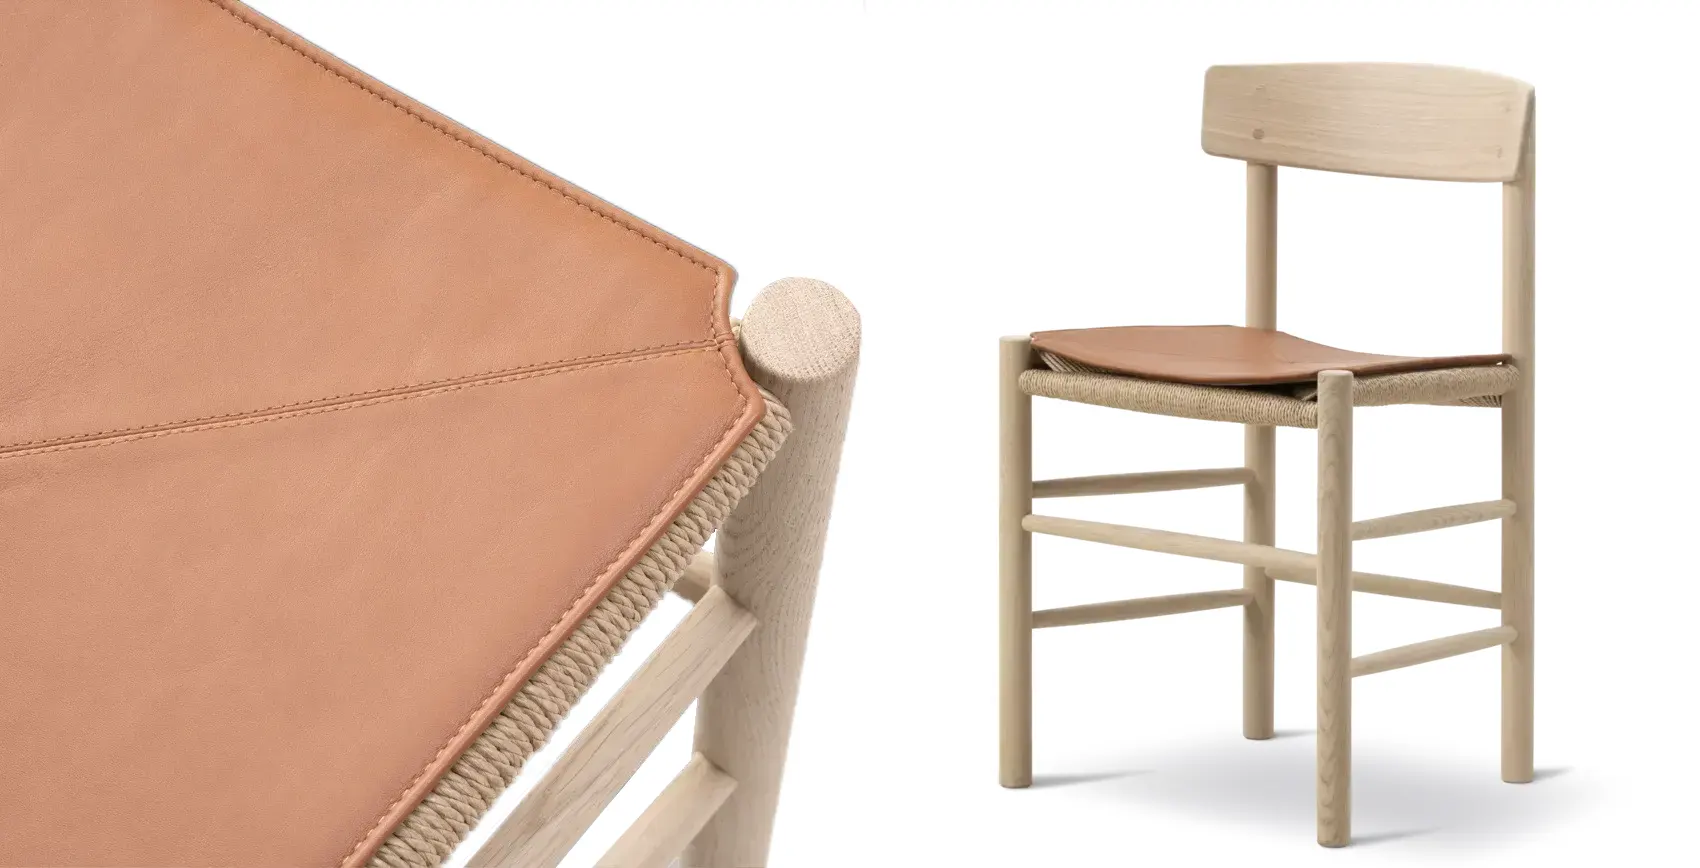 Fredericia - J39 Mogensen chair and Seat cushion